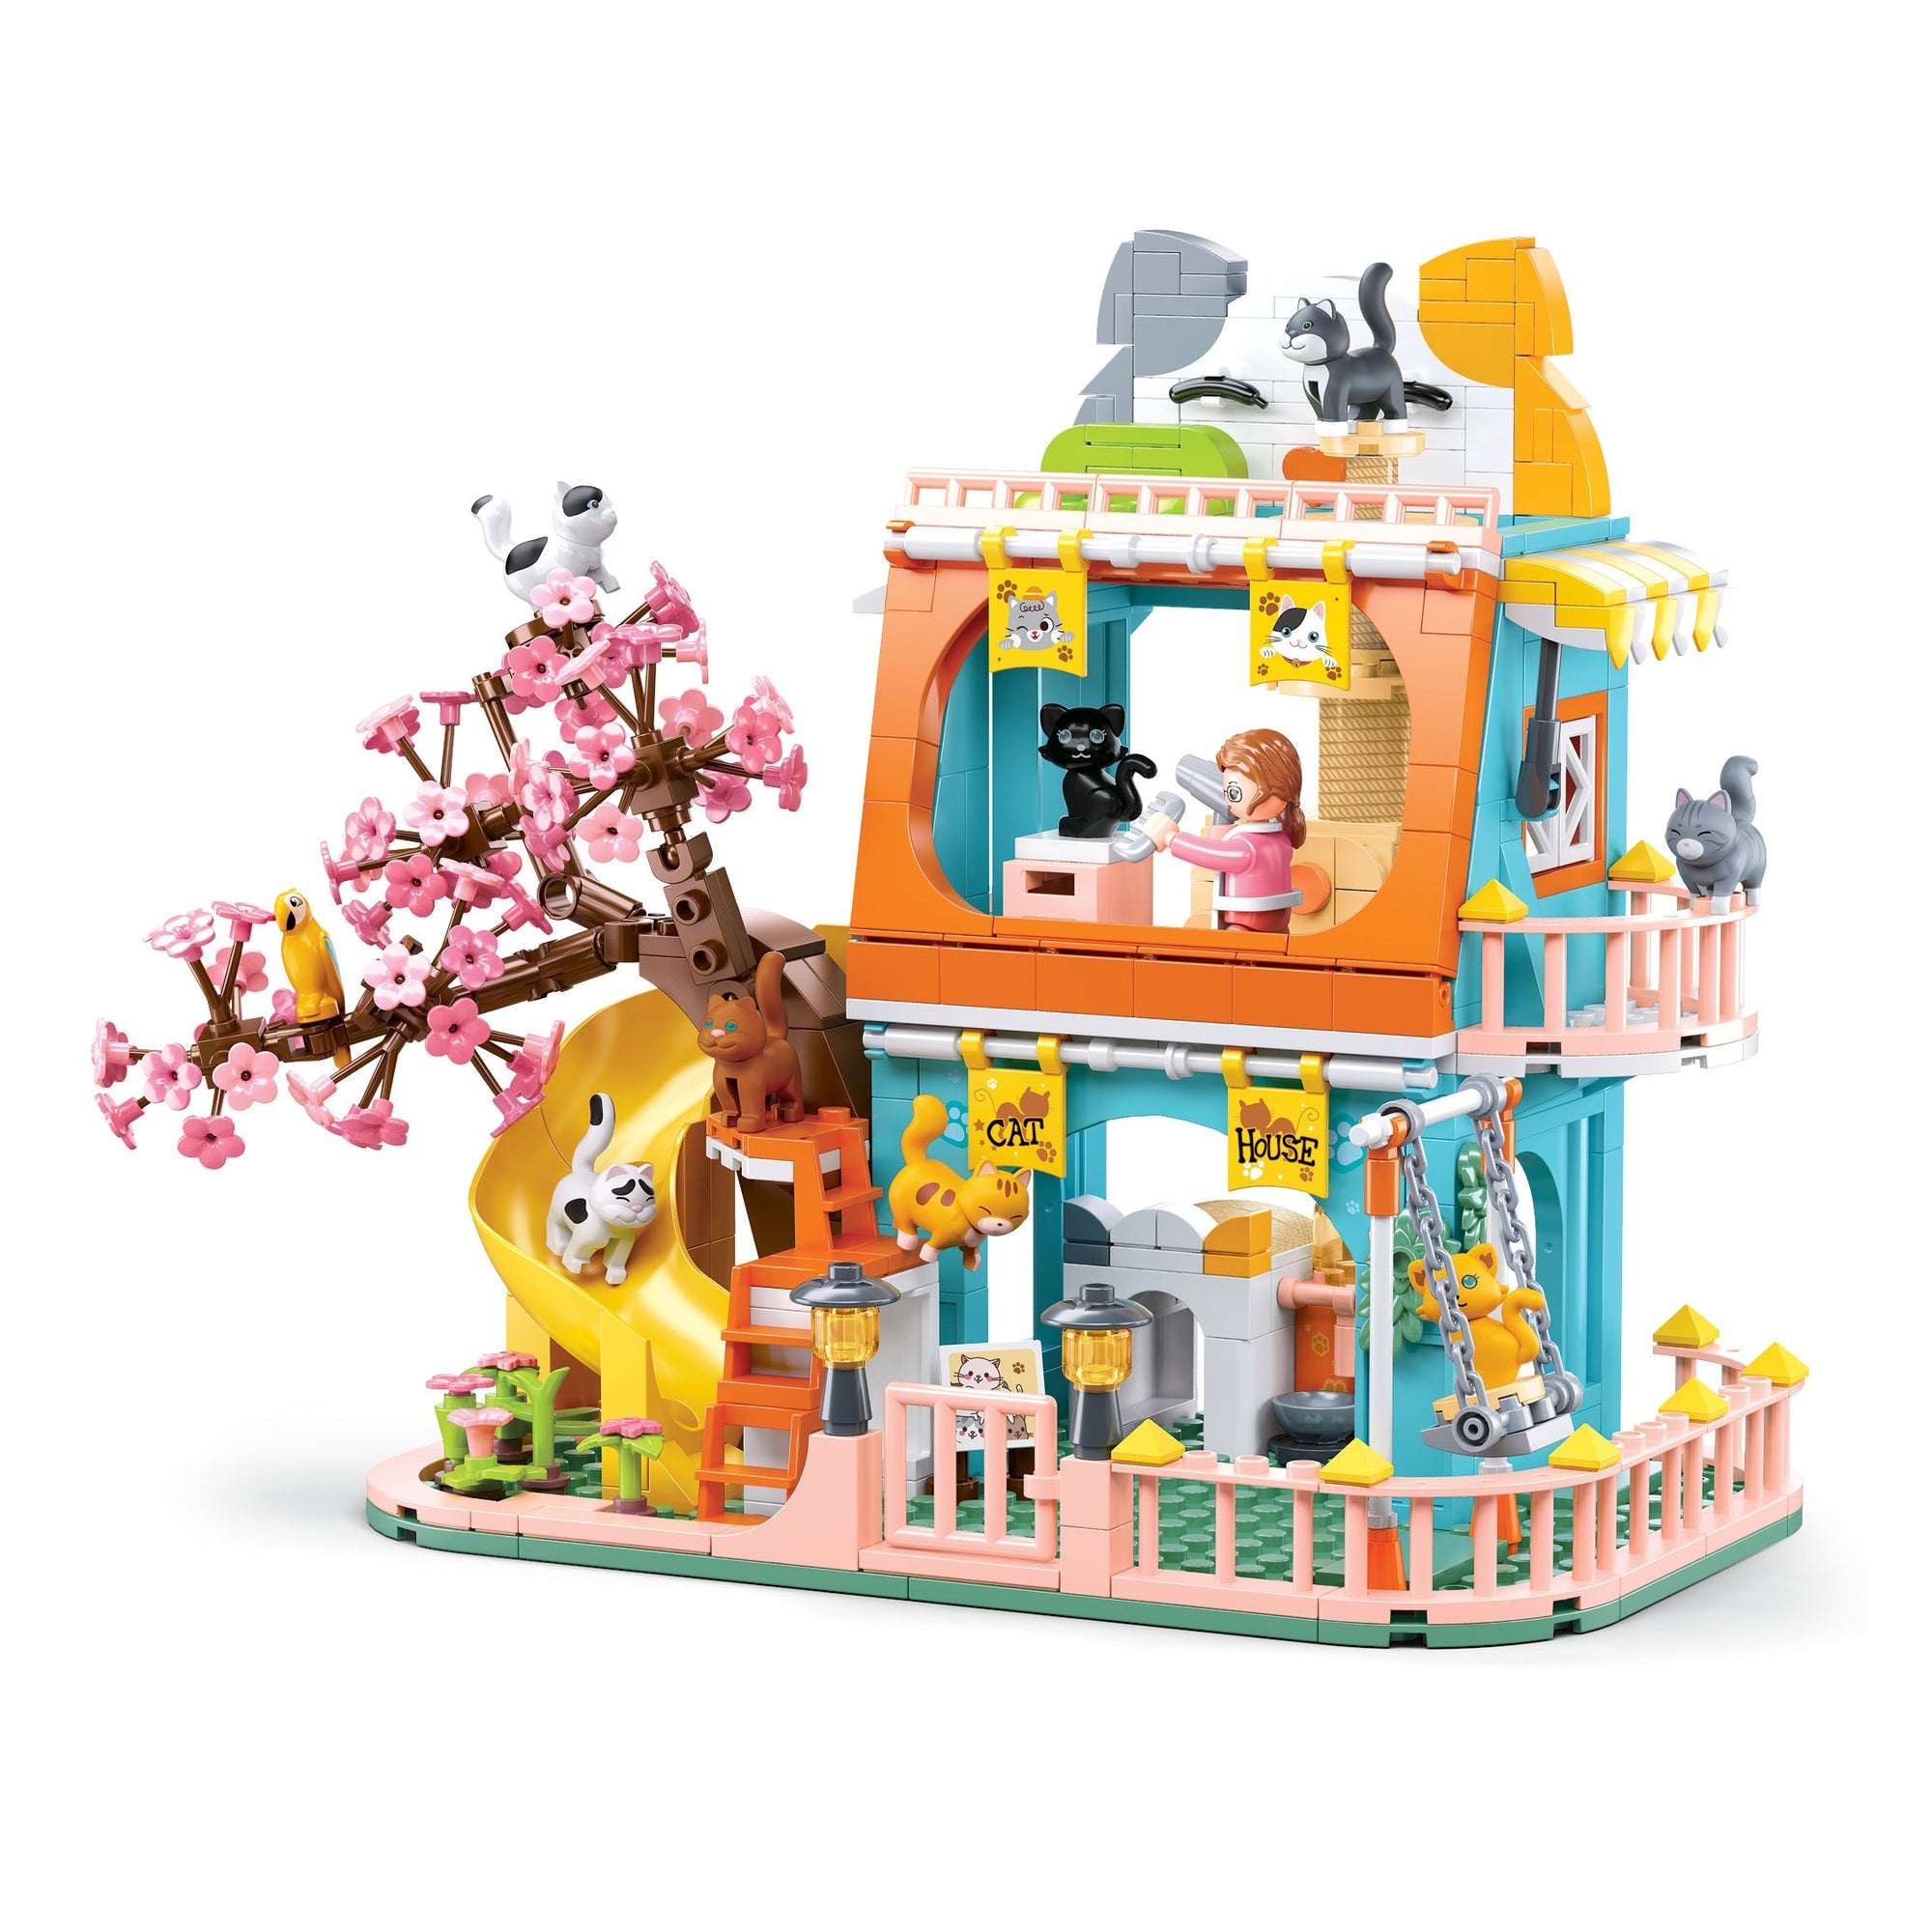 SLUBAN® Girls Dream-Cat House Building Blocks Kit for Girls || 10years to 16years - Toys4All.in